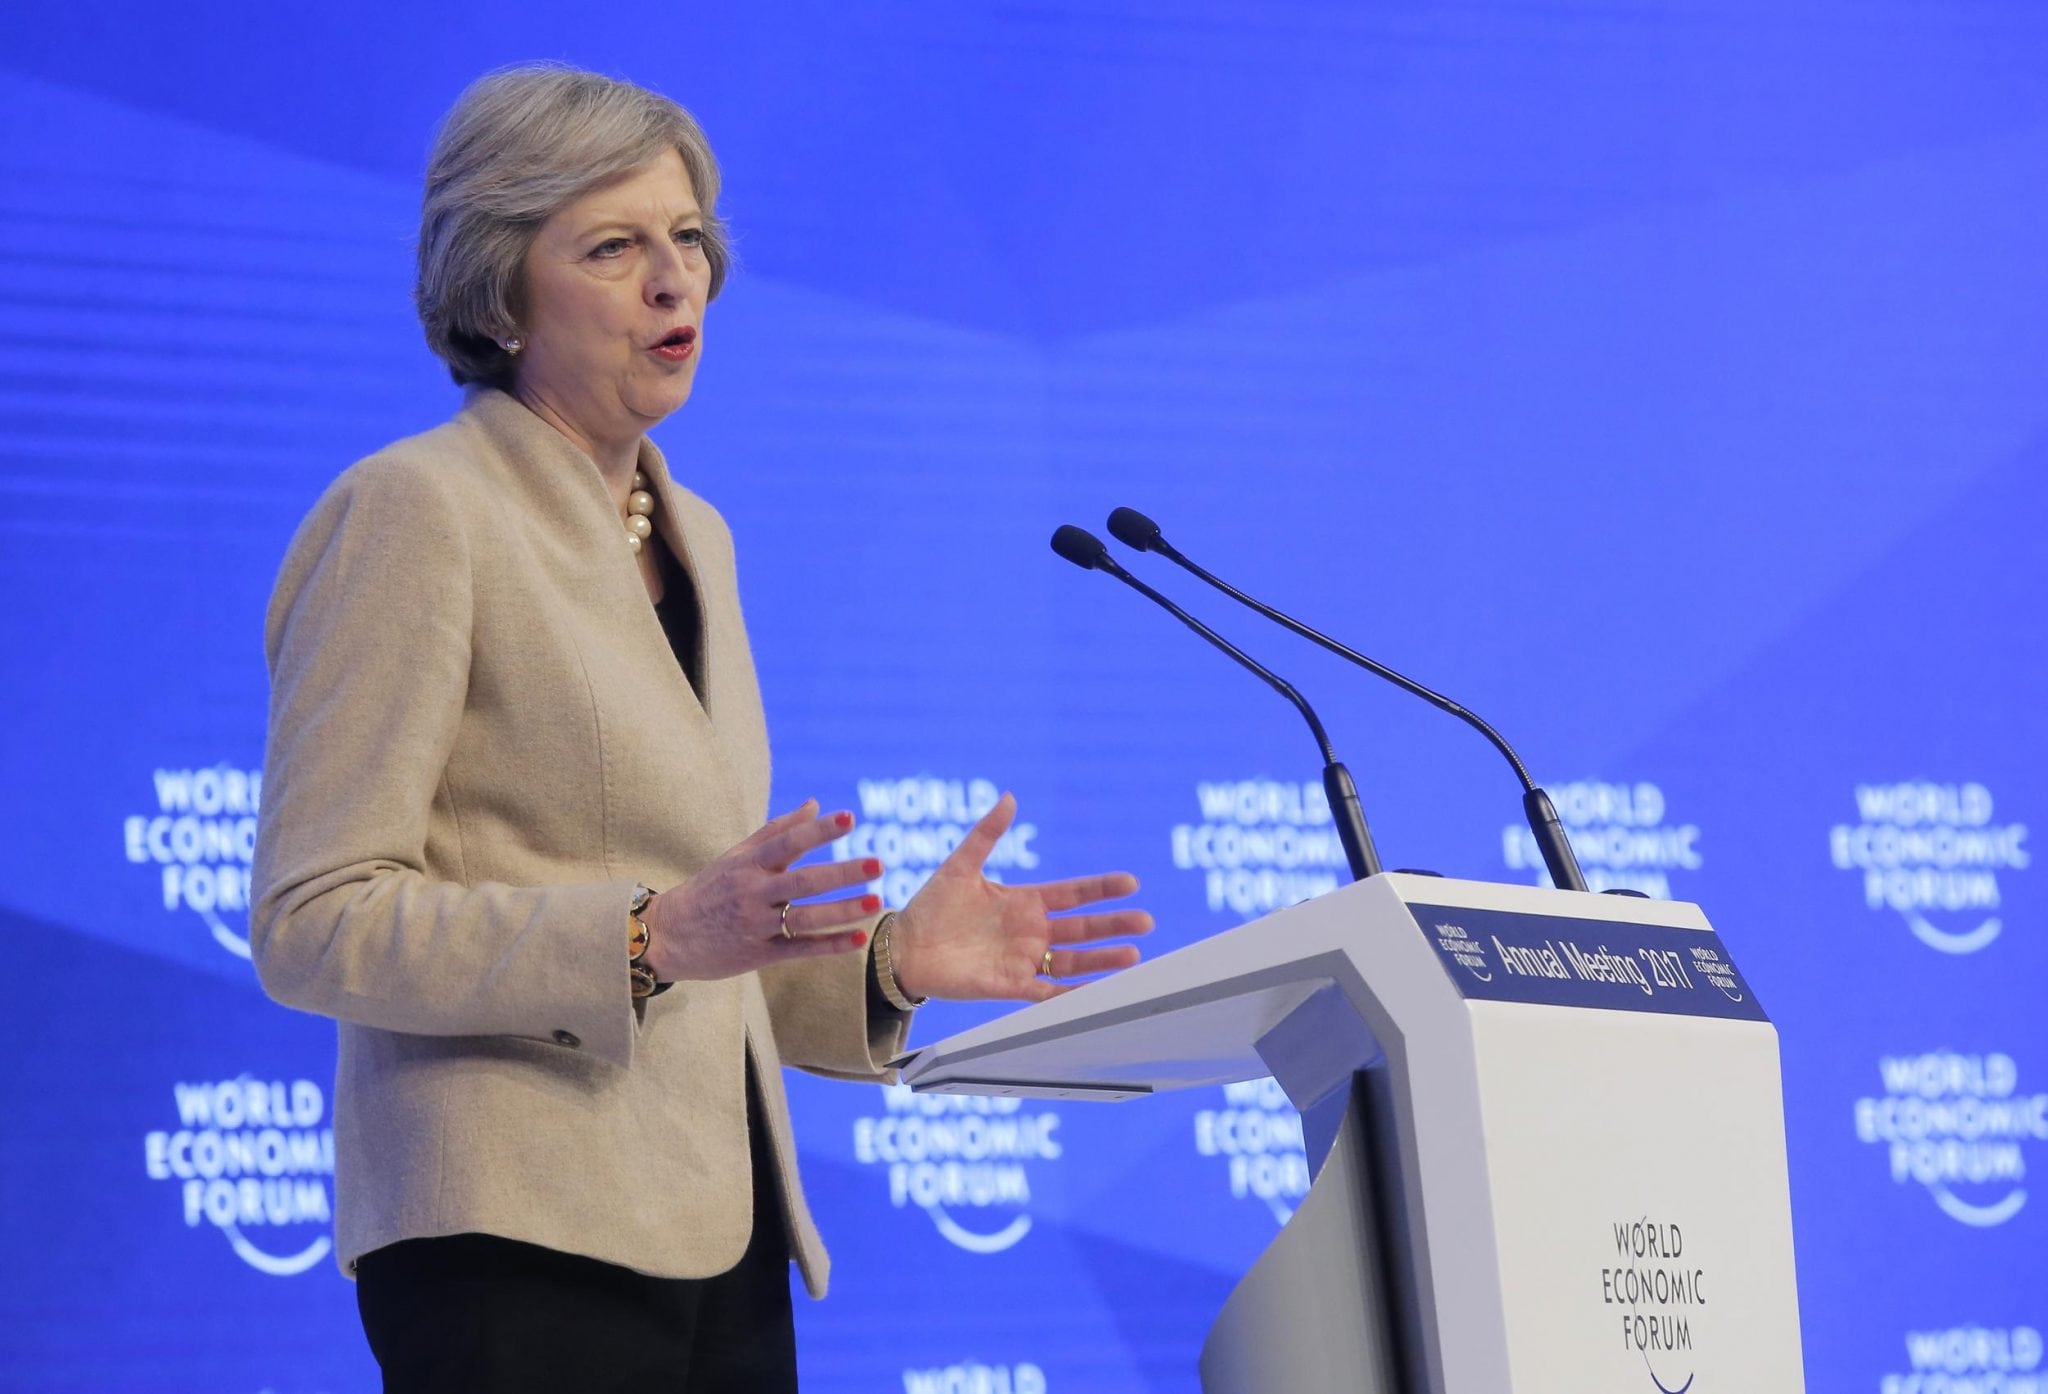 UK’s Prime Minister Theresa May on January 19, 2017 delivering a significant speech on Brexit during the World Economic Forum in Davos, Switzerland. 